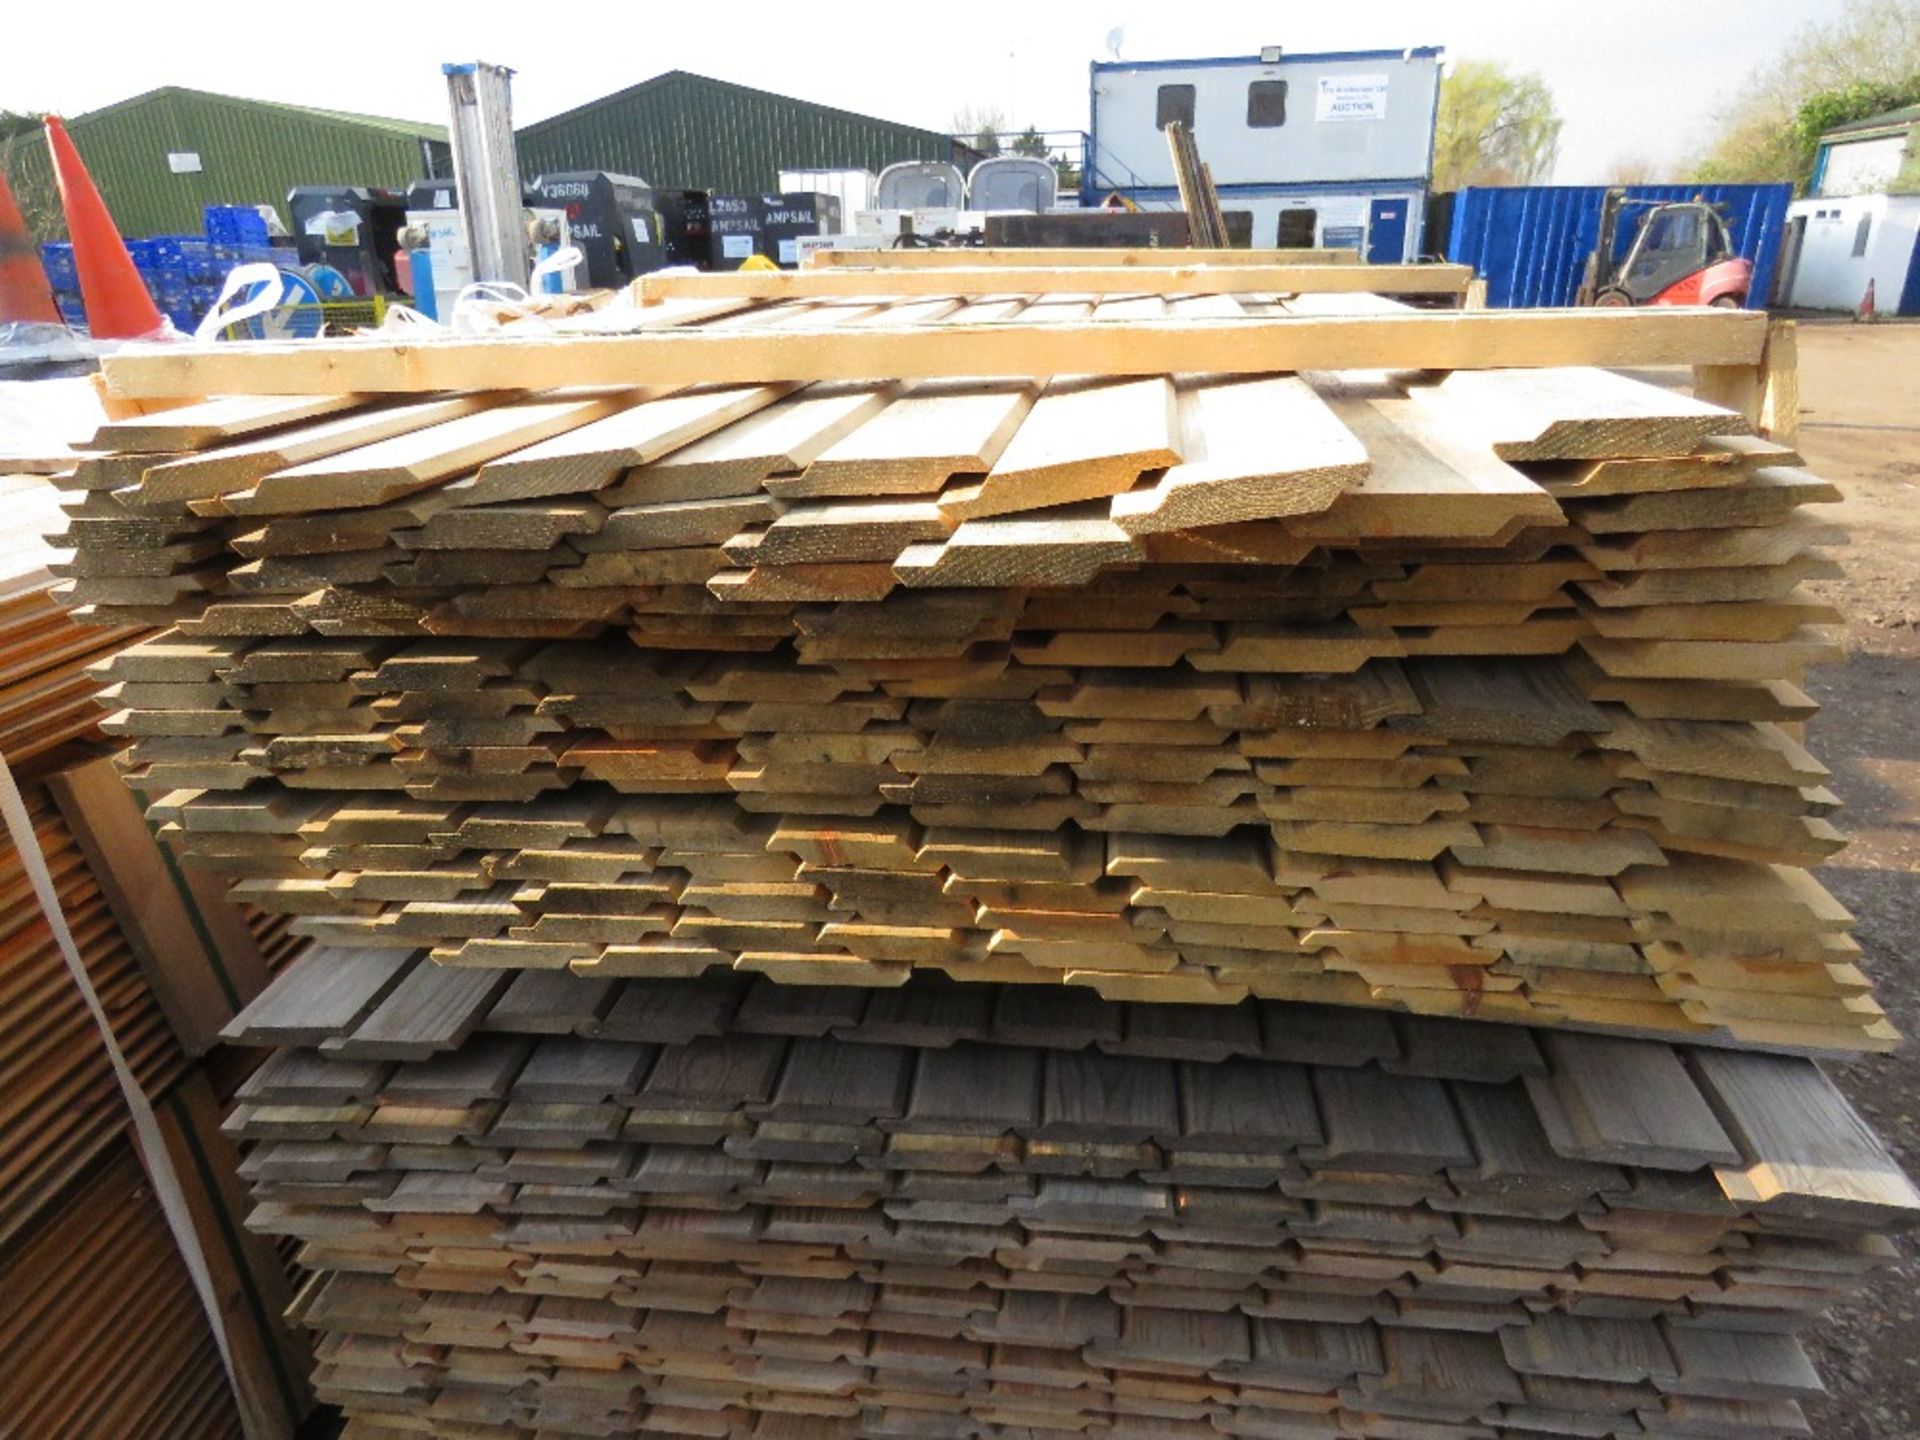 LARGE QUANTITY IN 2 PACKS OF UNTREATED SHIPLAP TIMBER BOARDS 1.83M X 100MM APPROX. - Image 3 of 5